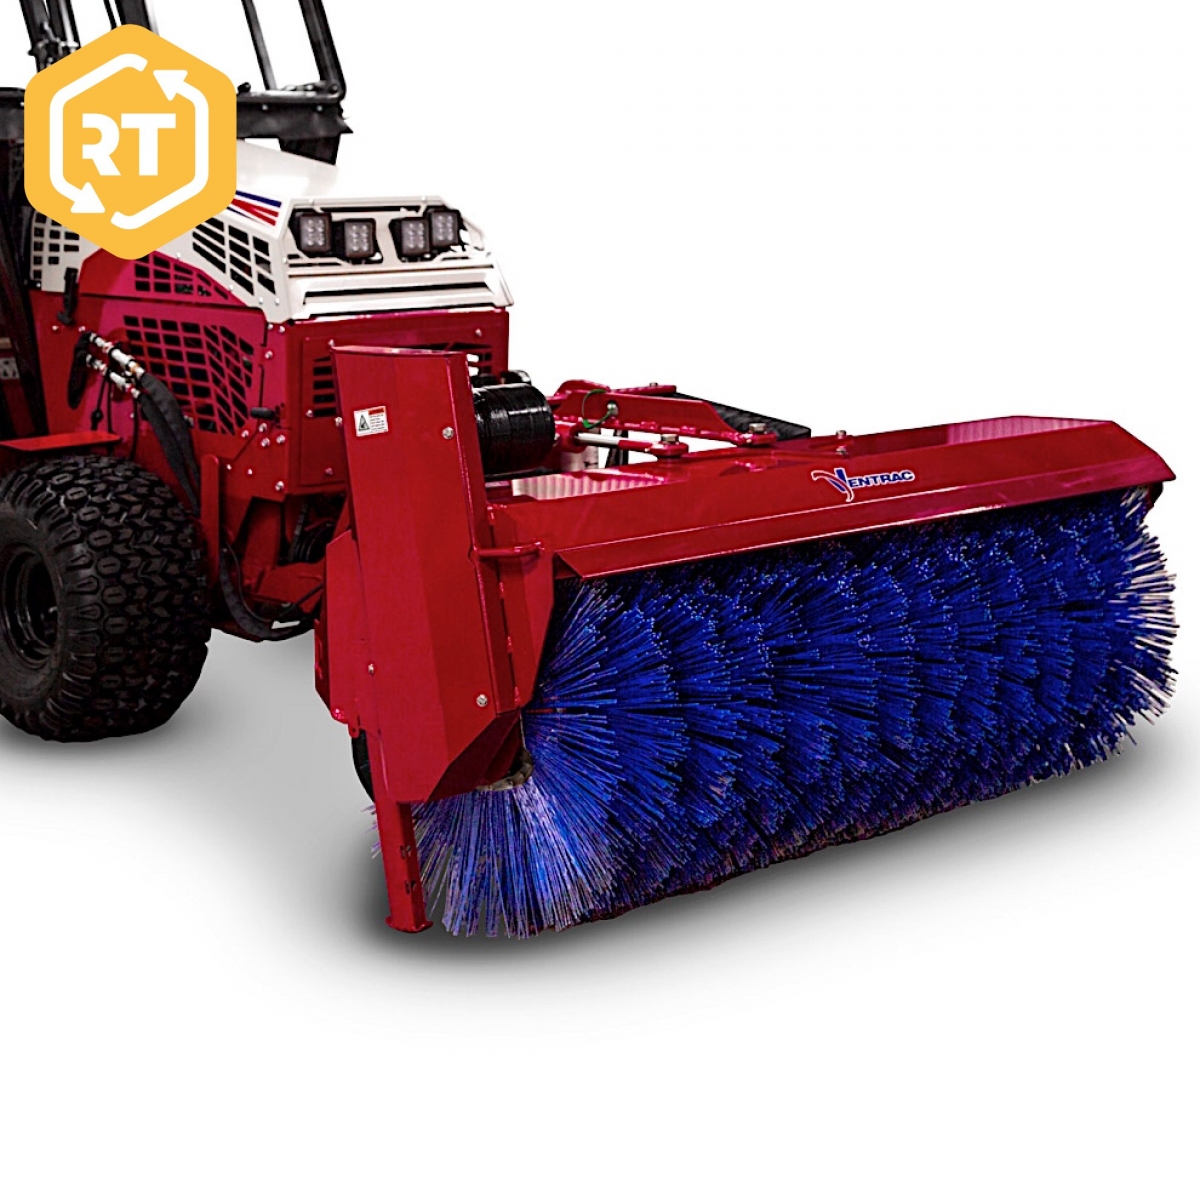 Ventrac 4520Y with KJ520 Narrow Broom | Available for Hire!